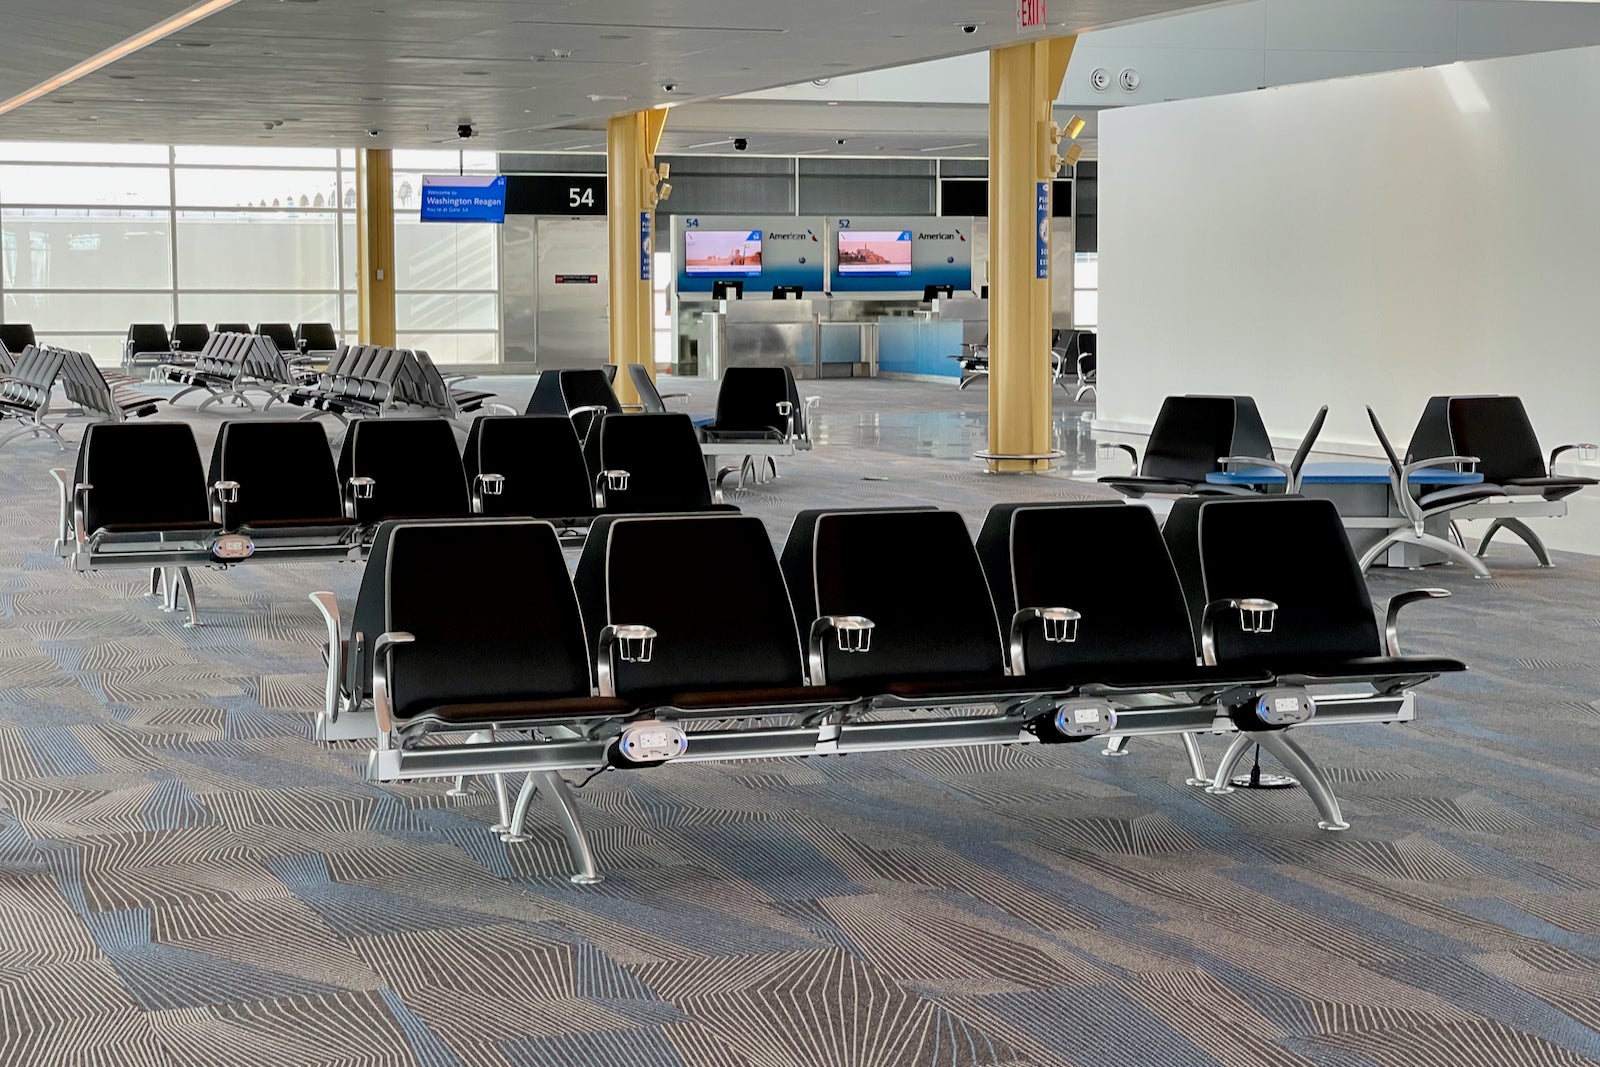 Farewell Gate 35X: American Airlines Welcomes Customers to a New